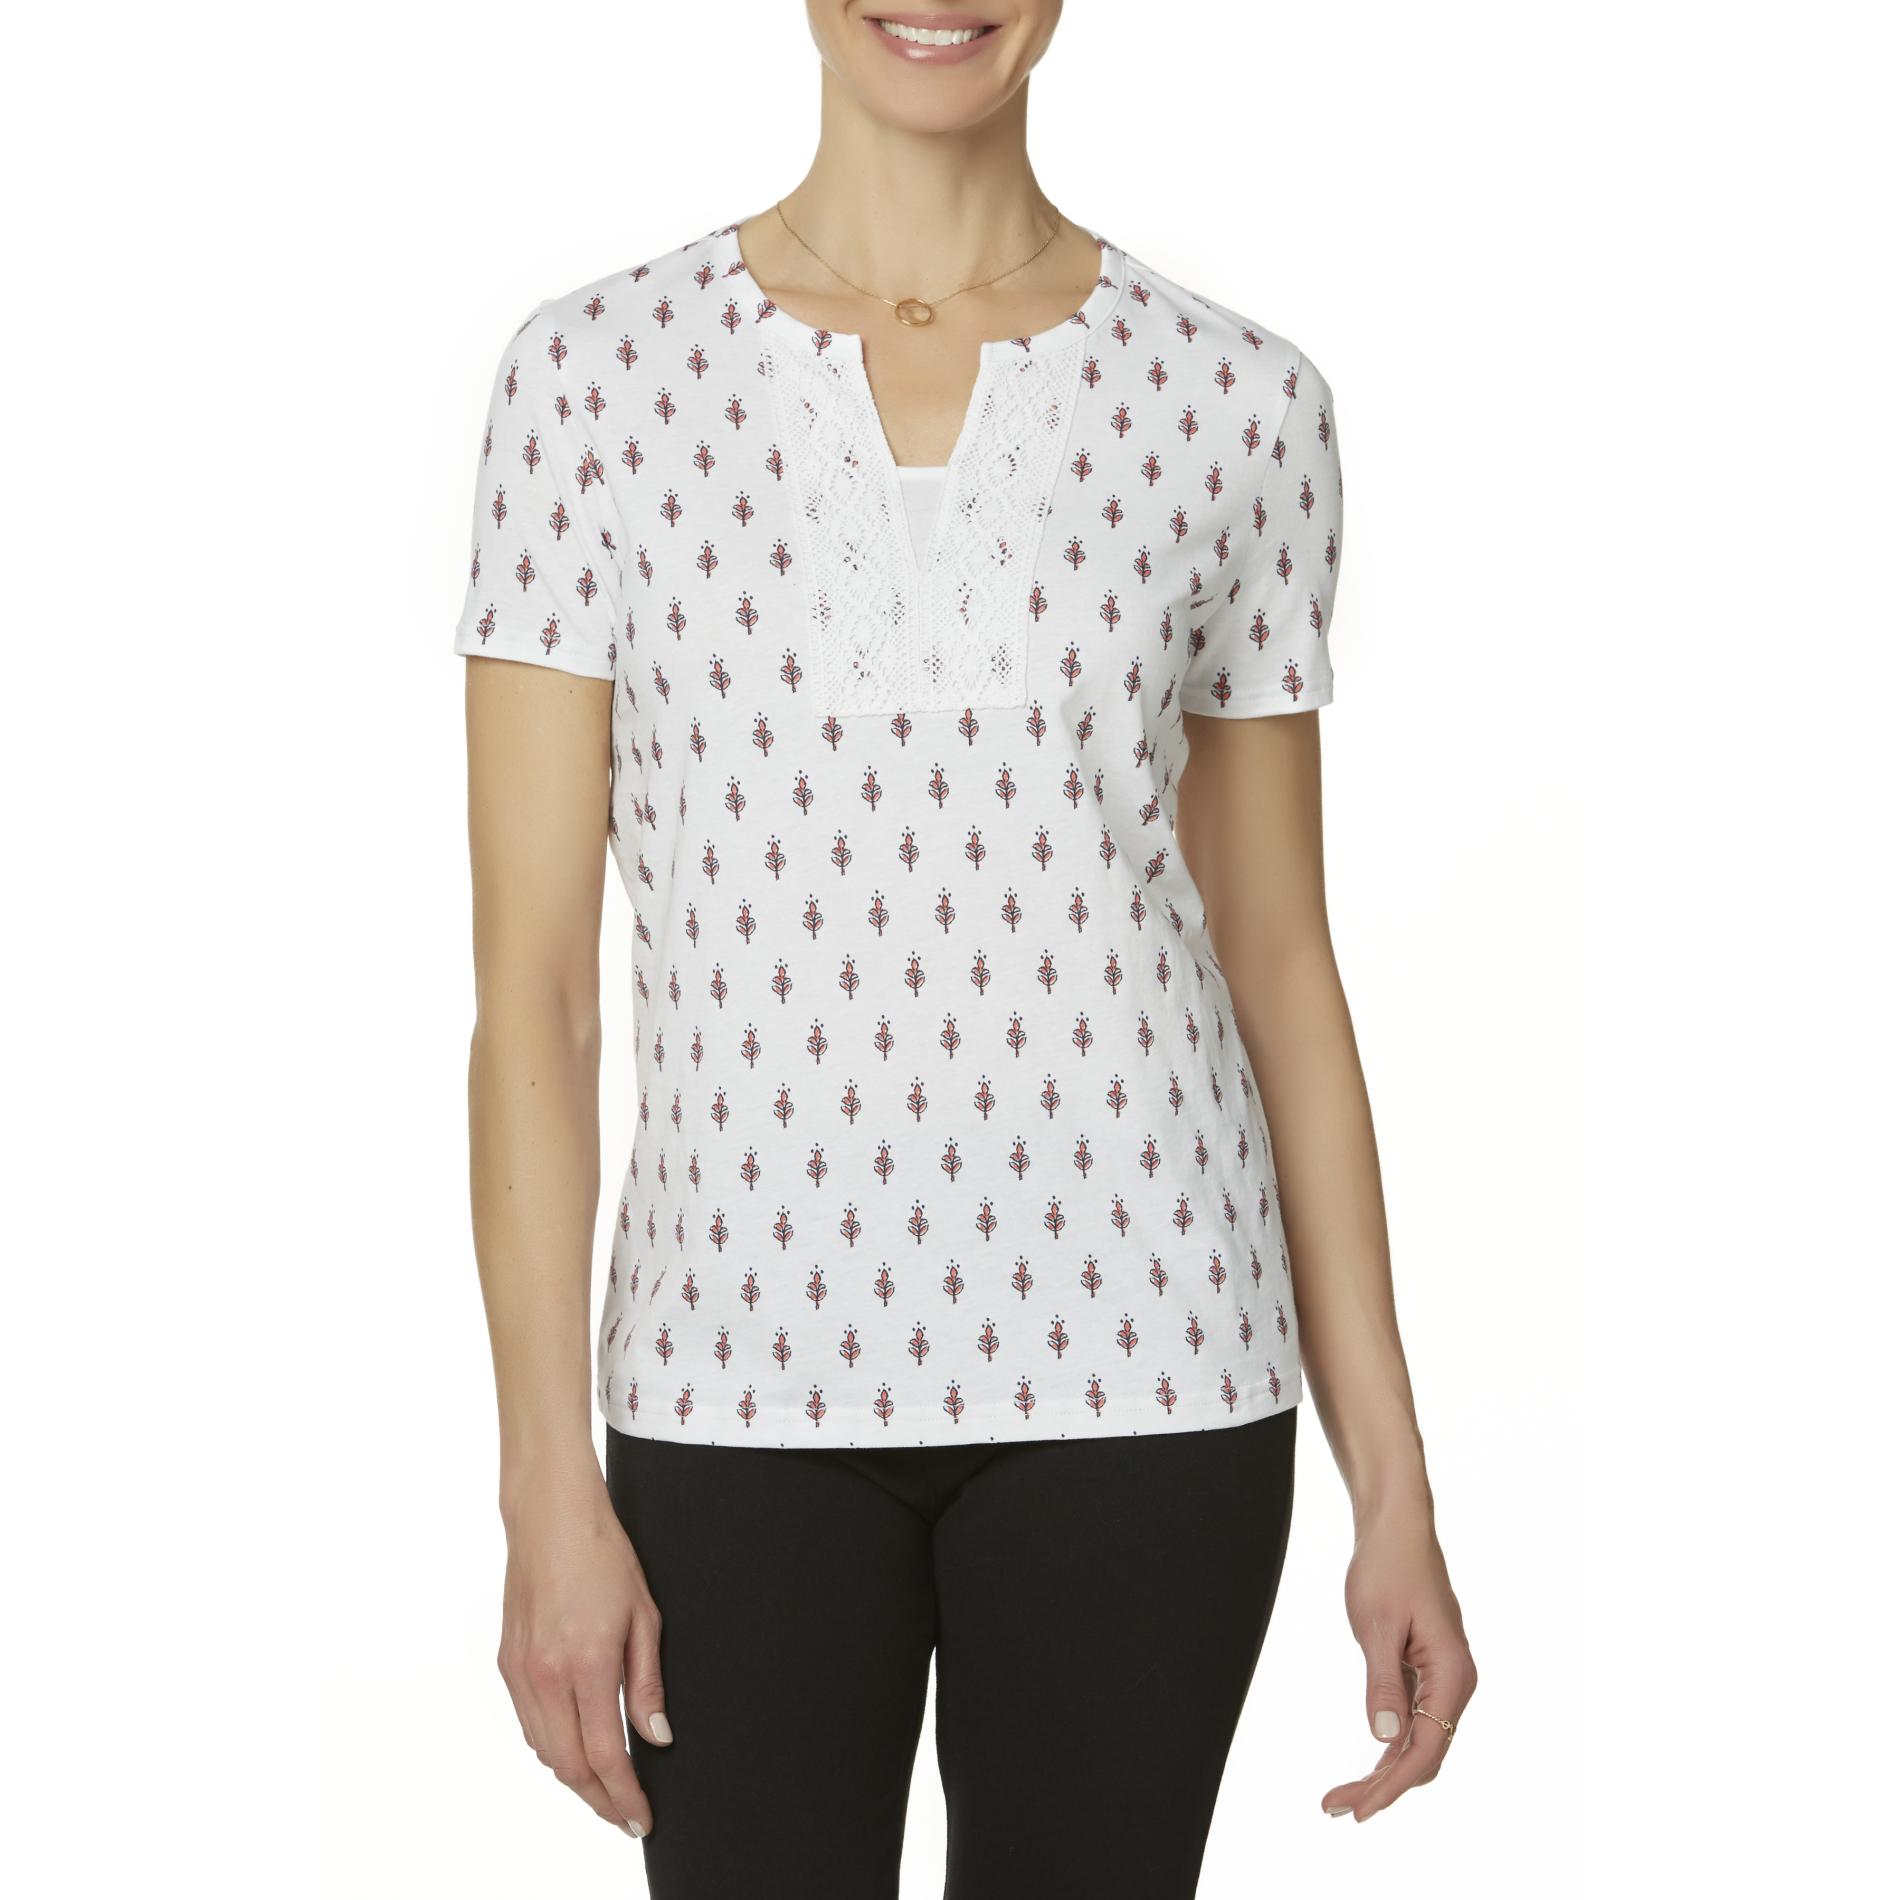 Basic Editions Women's Embellished Short-Sleeve Top - Floral